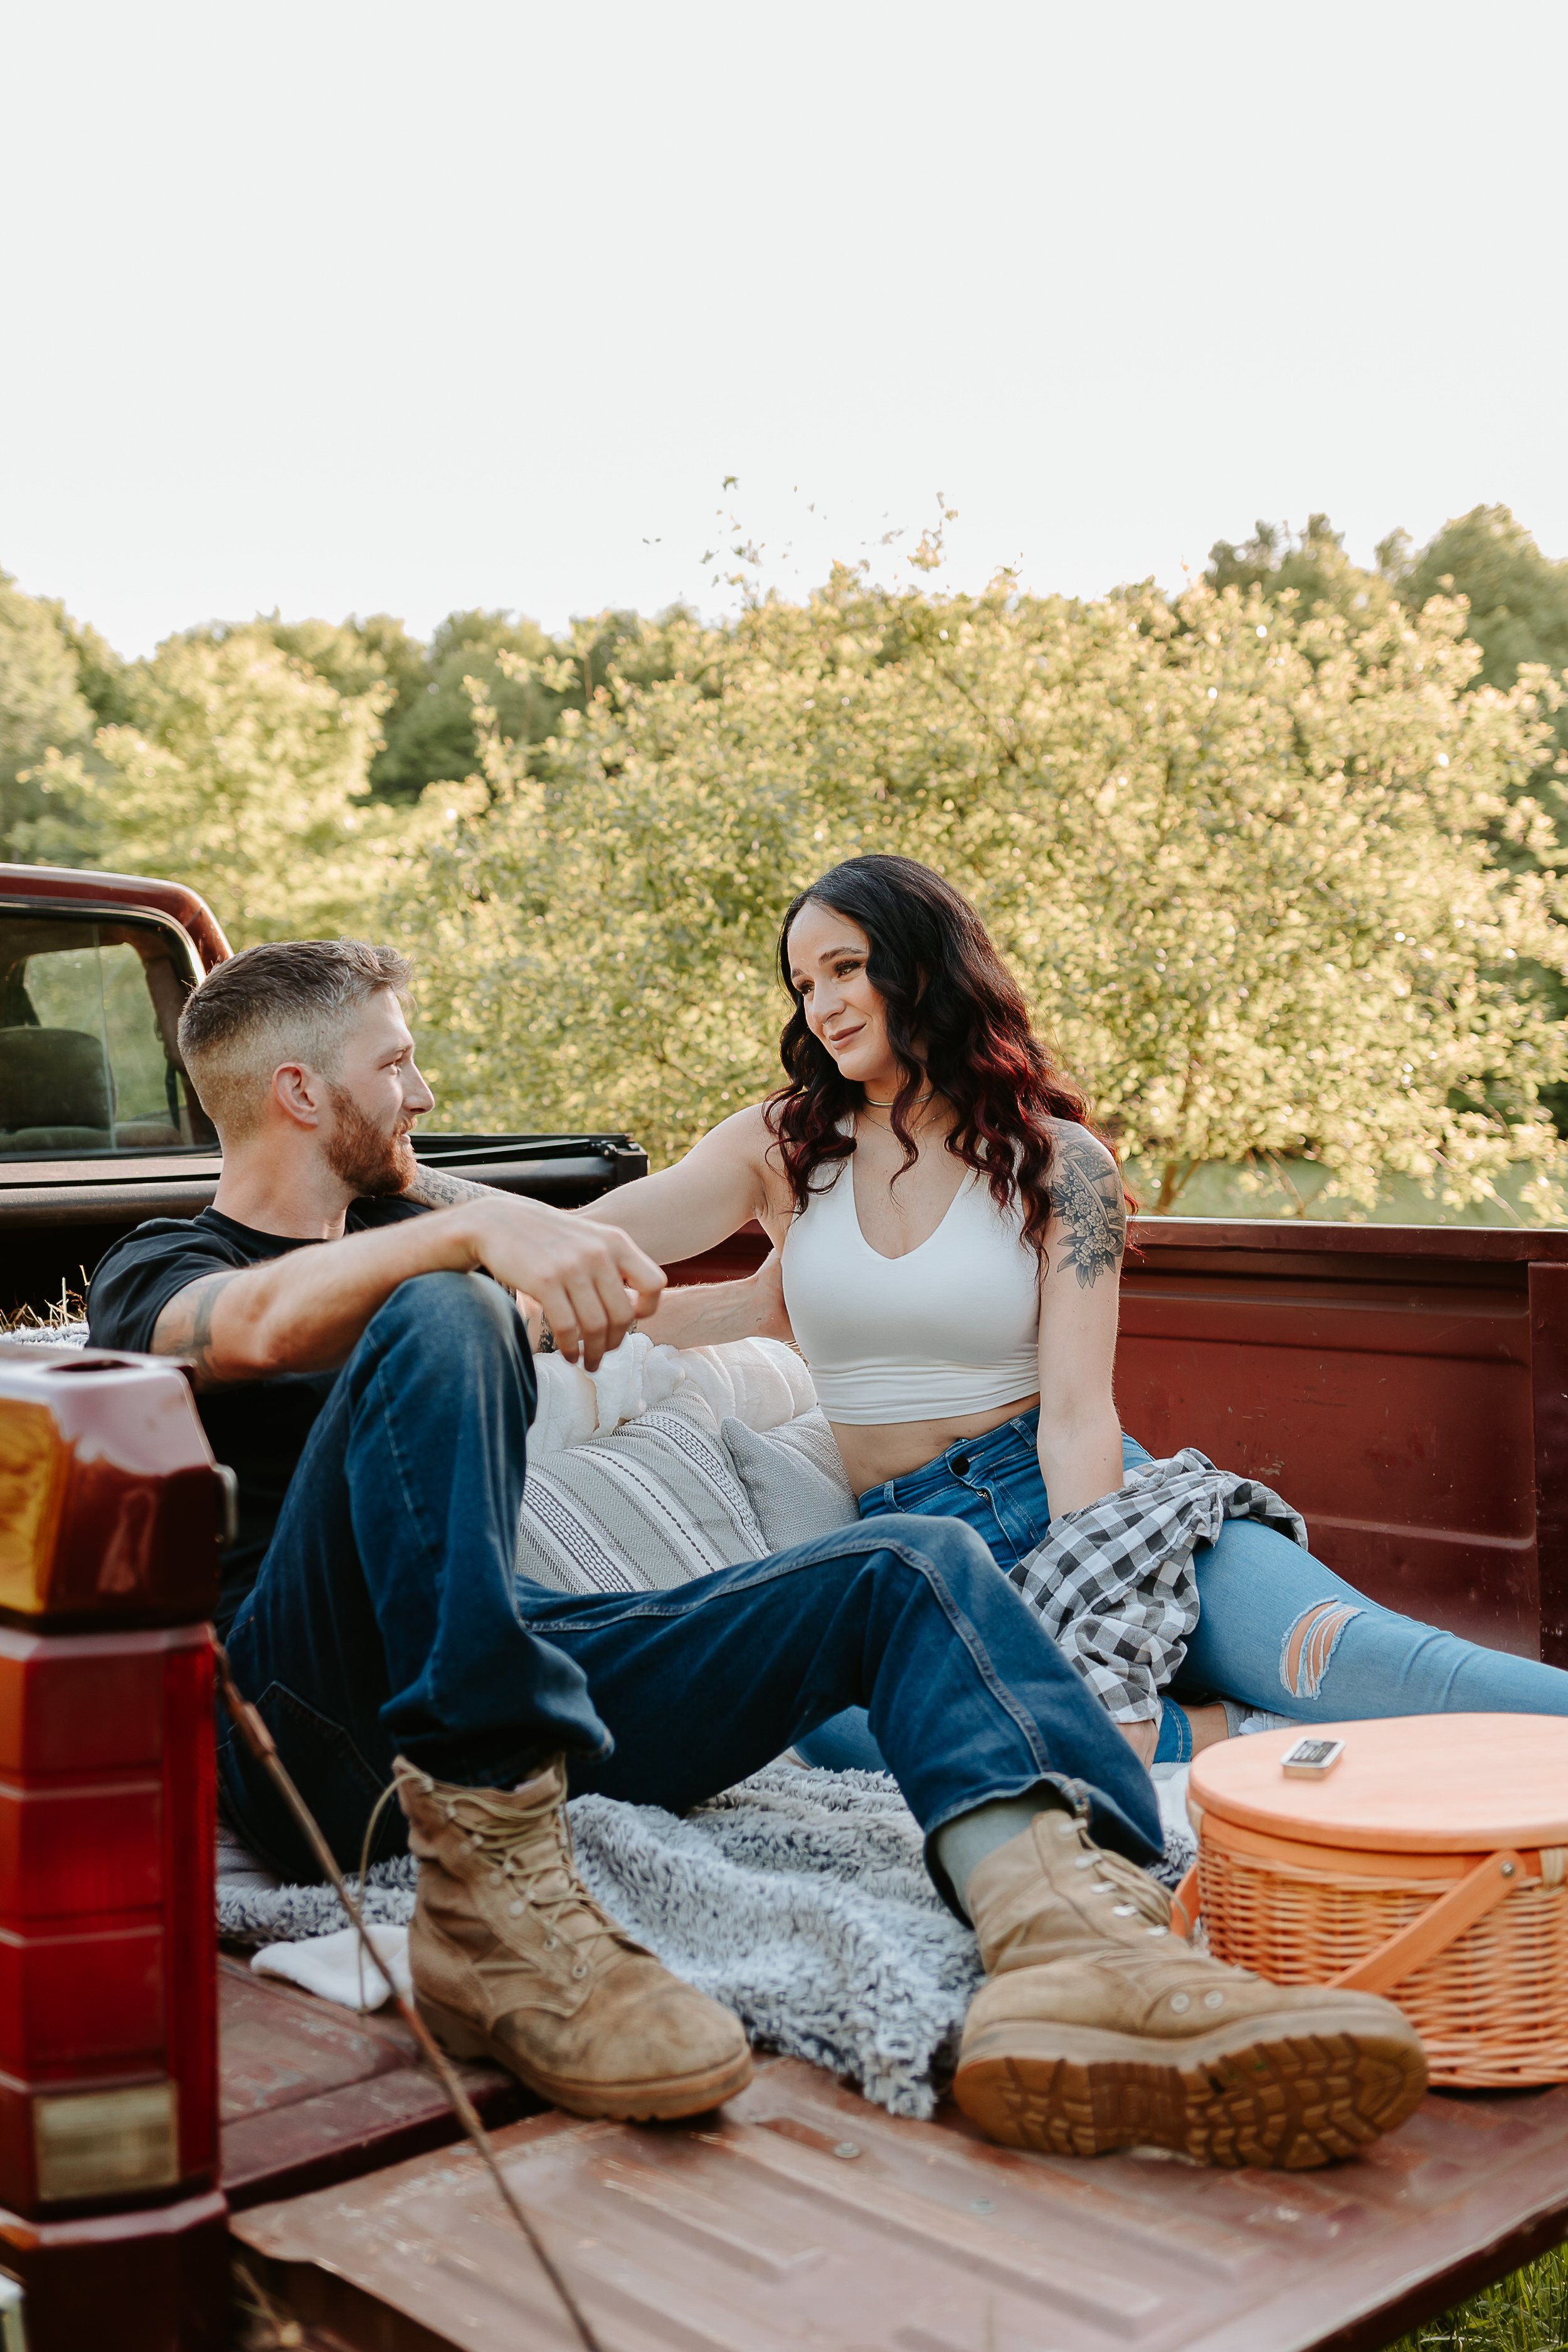 Woman looks at man lovingly while sitting in bed of red truck.